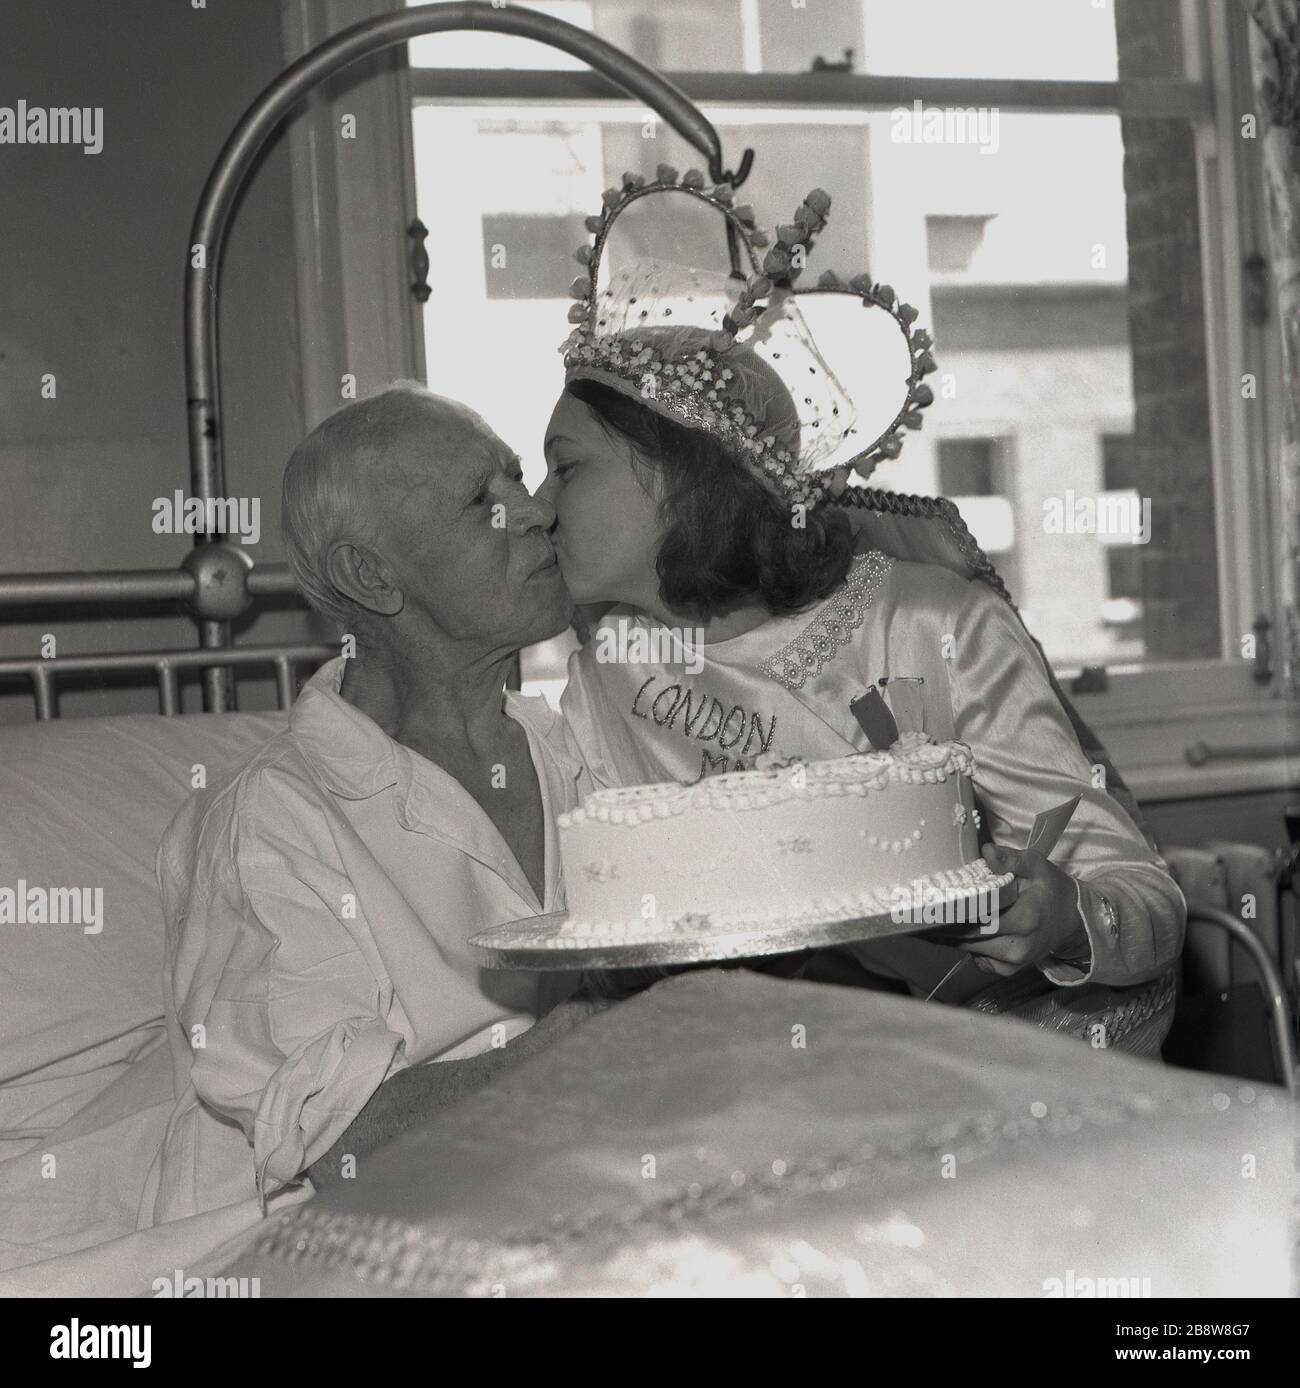 1960s, historical, a visit to a hospital by the London May Queen. The young teenage girl presents a cake and gives a kiss on the cheek to an elderly male patient sitting in his bed, Lewisham, South East London, England, UK. Stock Photo